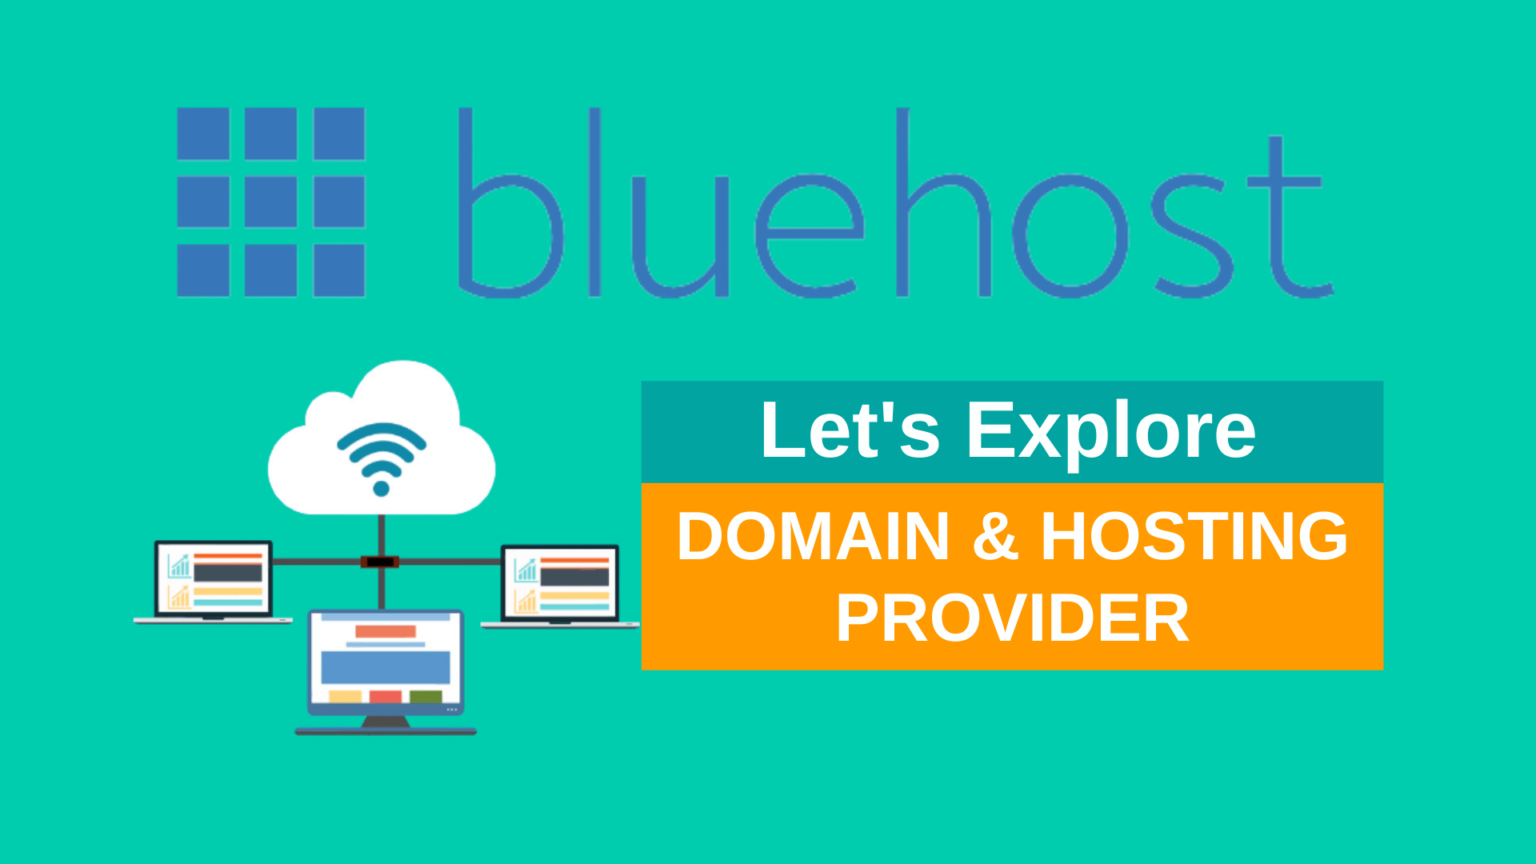 bluehost – the web hosting and domain provider